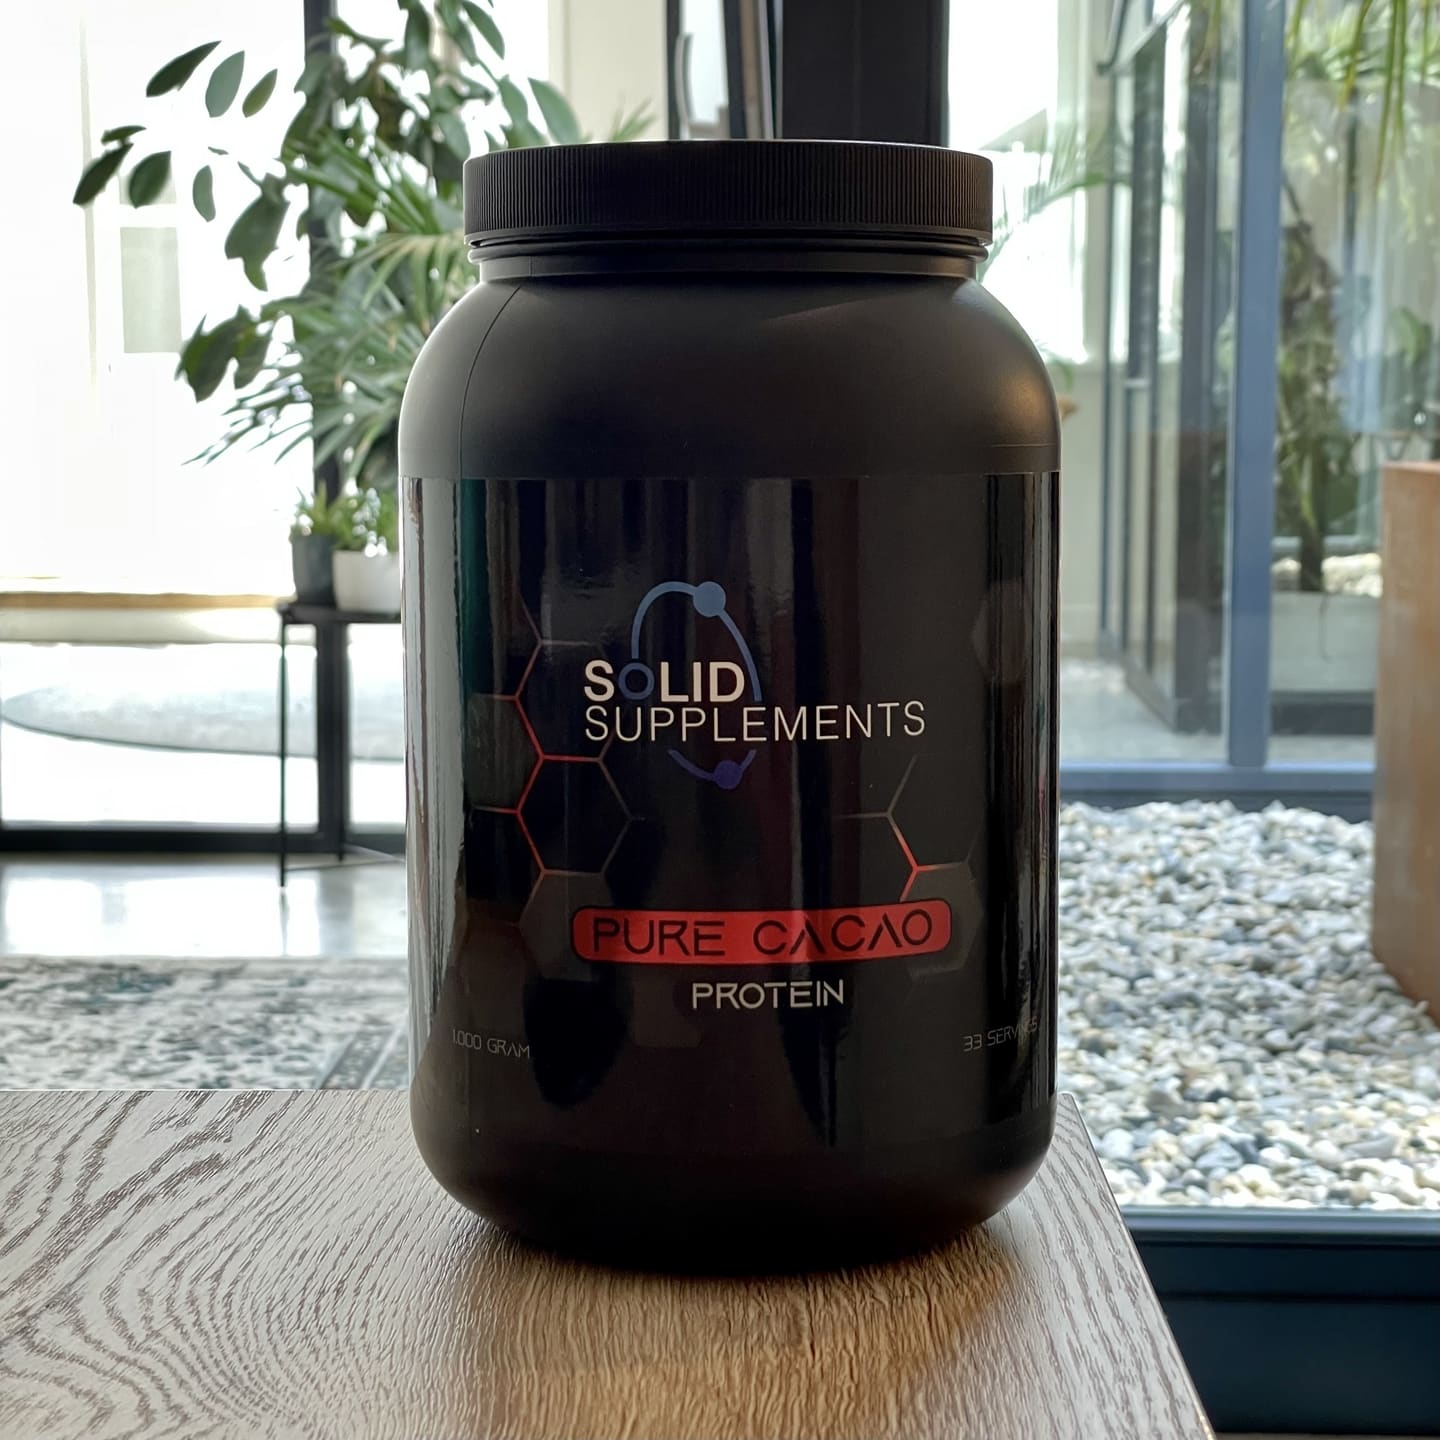 Pure cacao protein van Solid Supplements